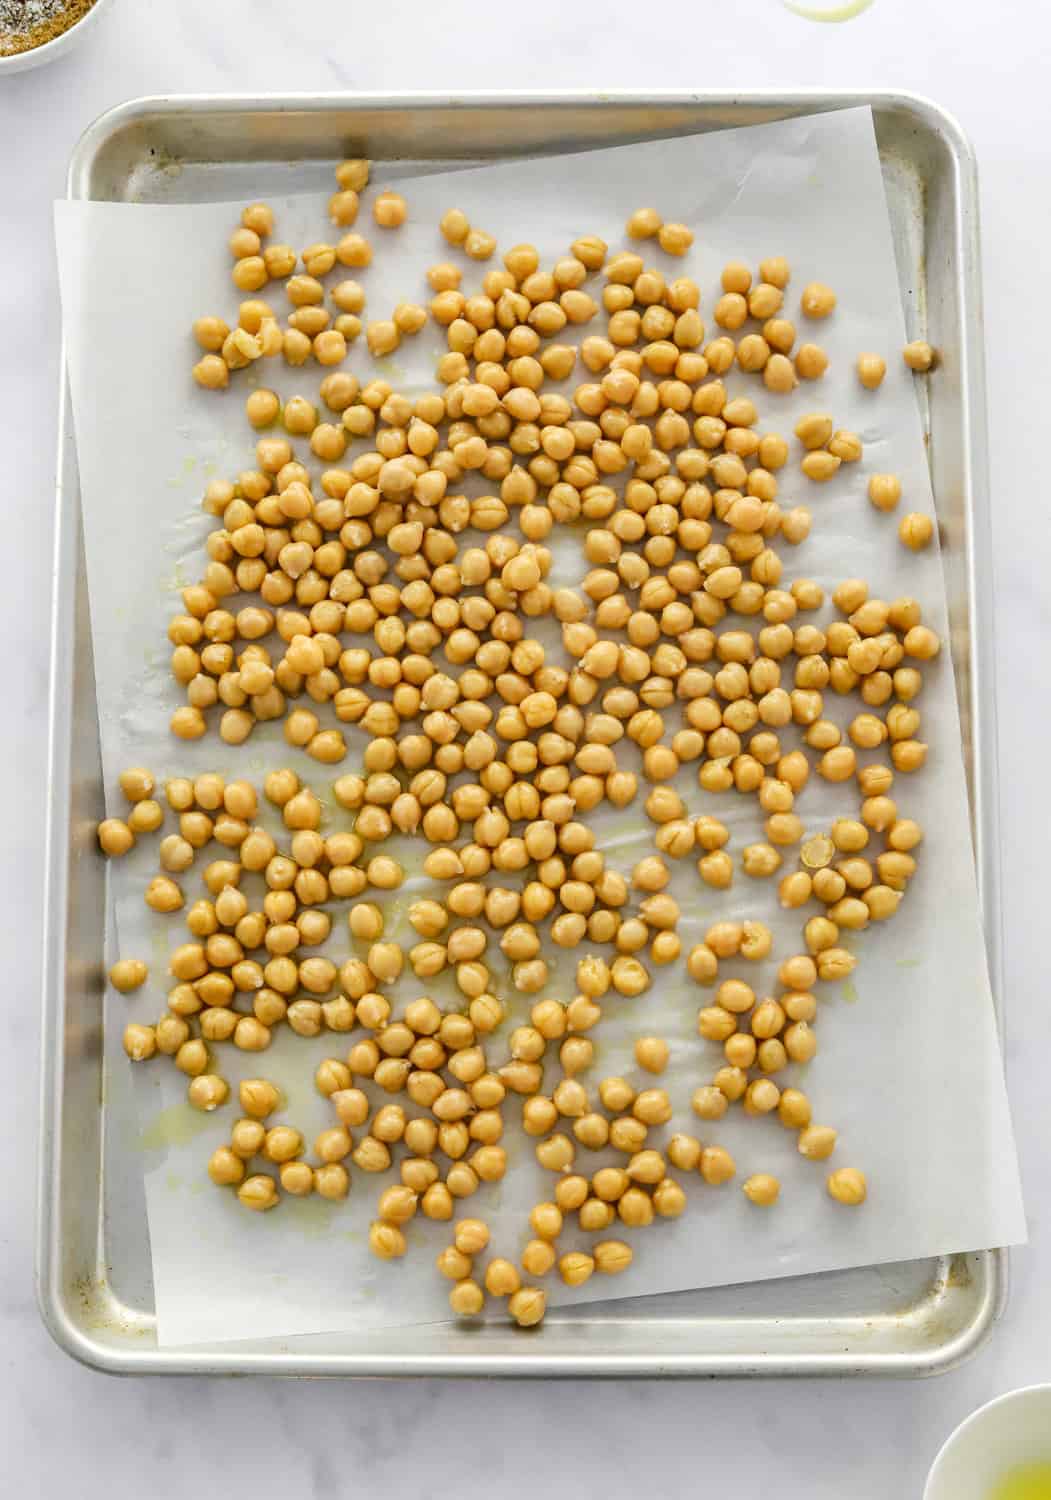 Uncooked chickpeas covered in olive oil on a baking sheet lined with white parchment paper.